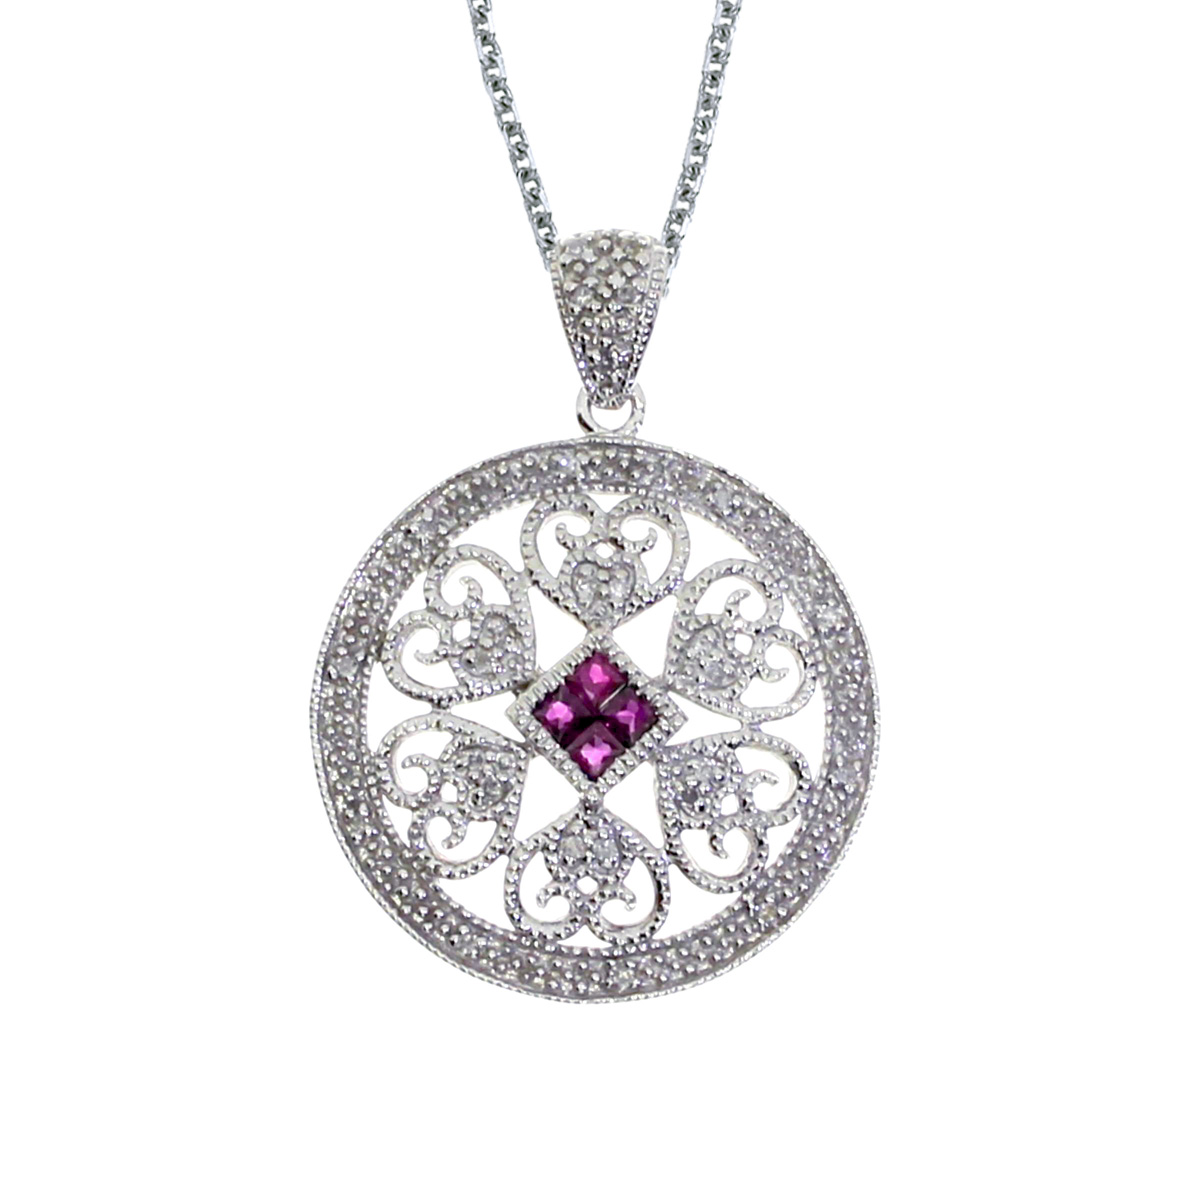 JCX2634: A beautiful round filigree pendant with four rubies and .08 total ct diamonds.